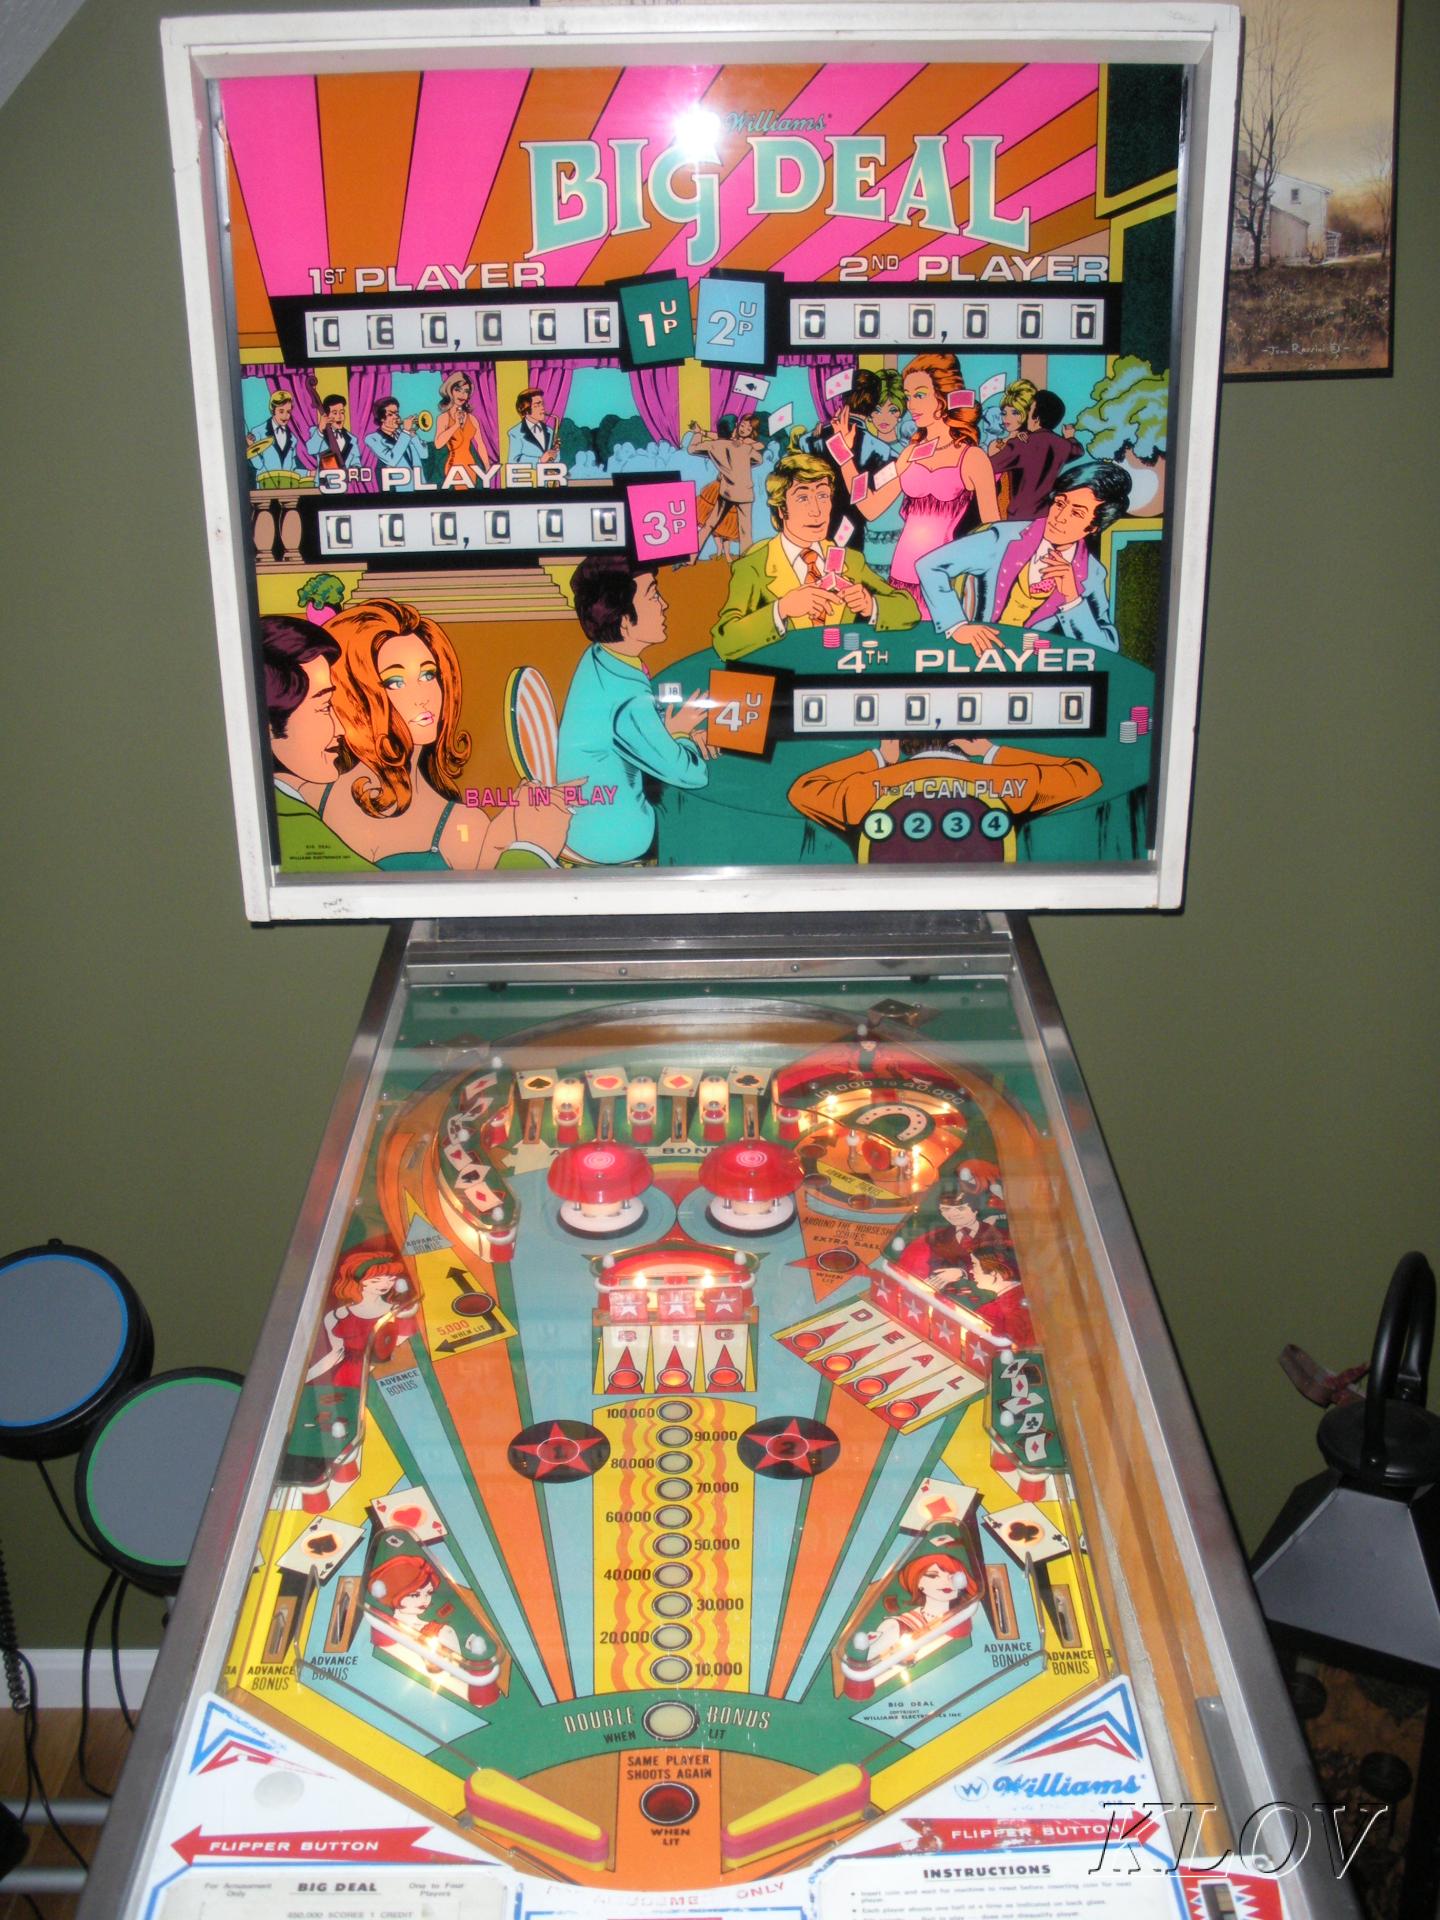 1977 Williams Liberty Bell Pinball Basic Tune-up Kit Includes Rubber Ring Kit 